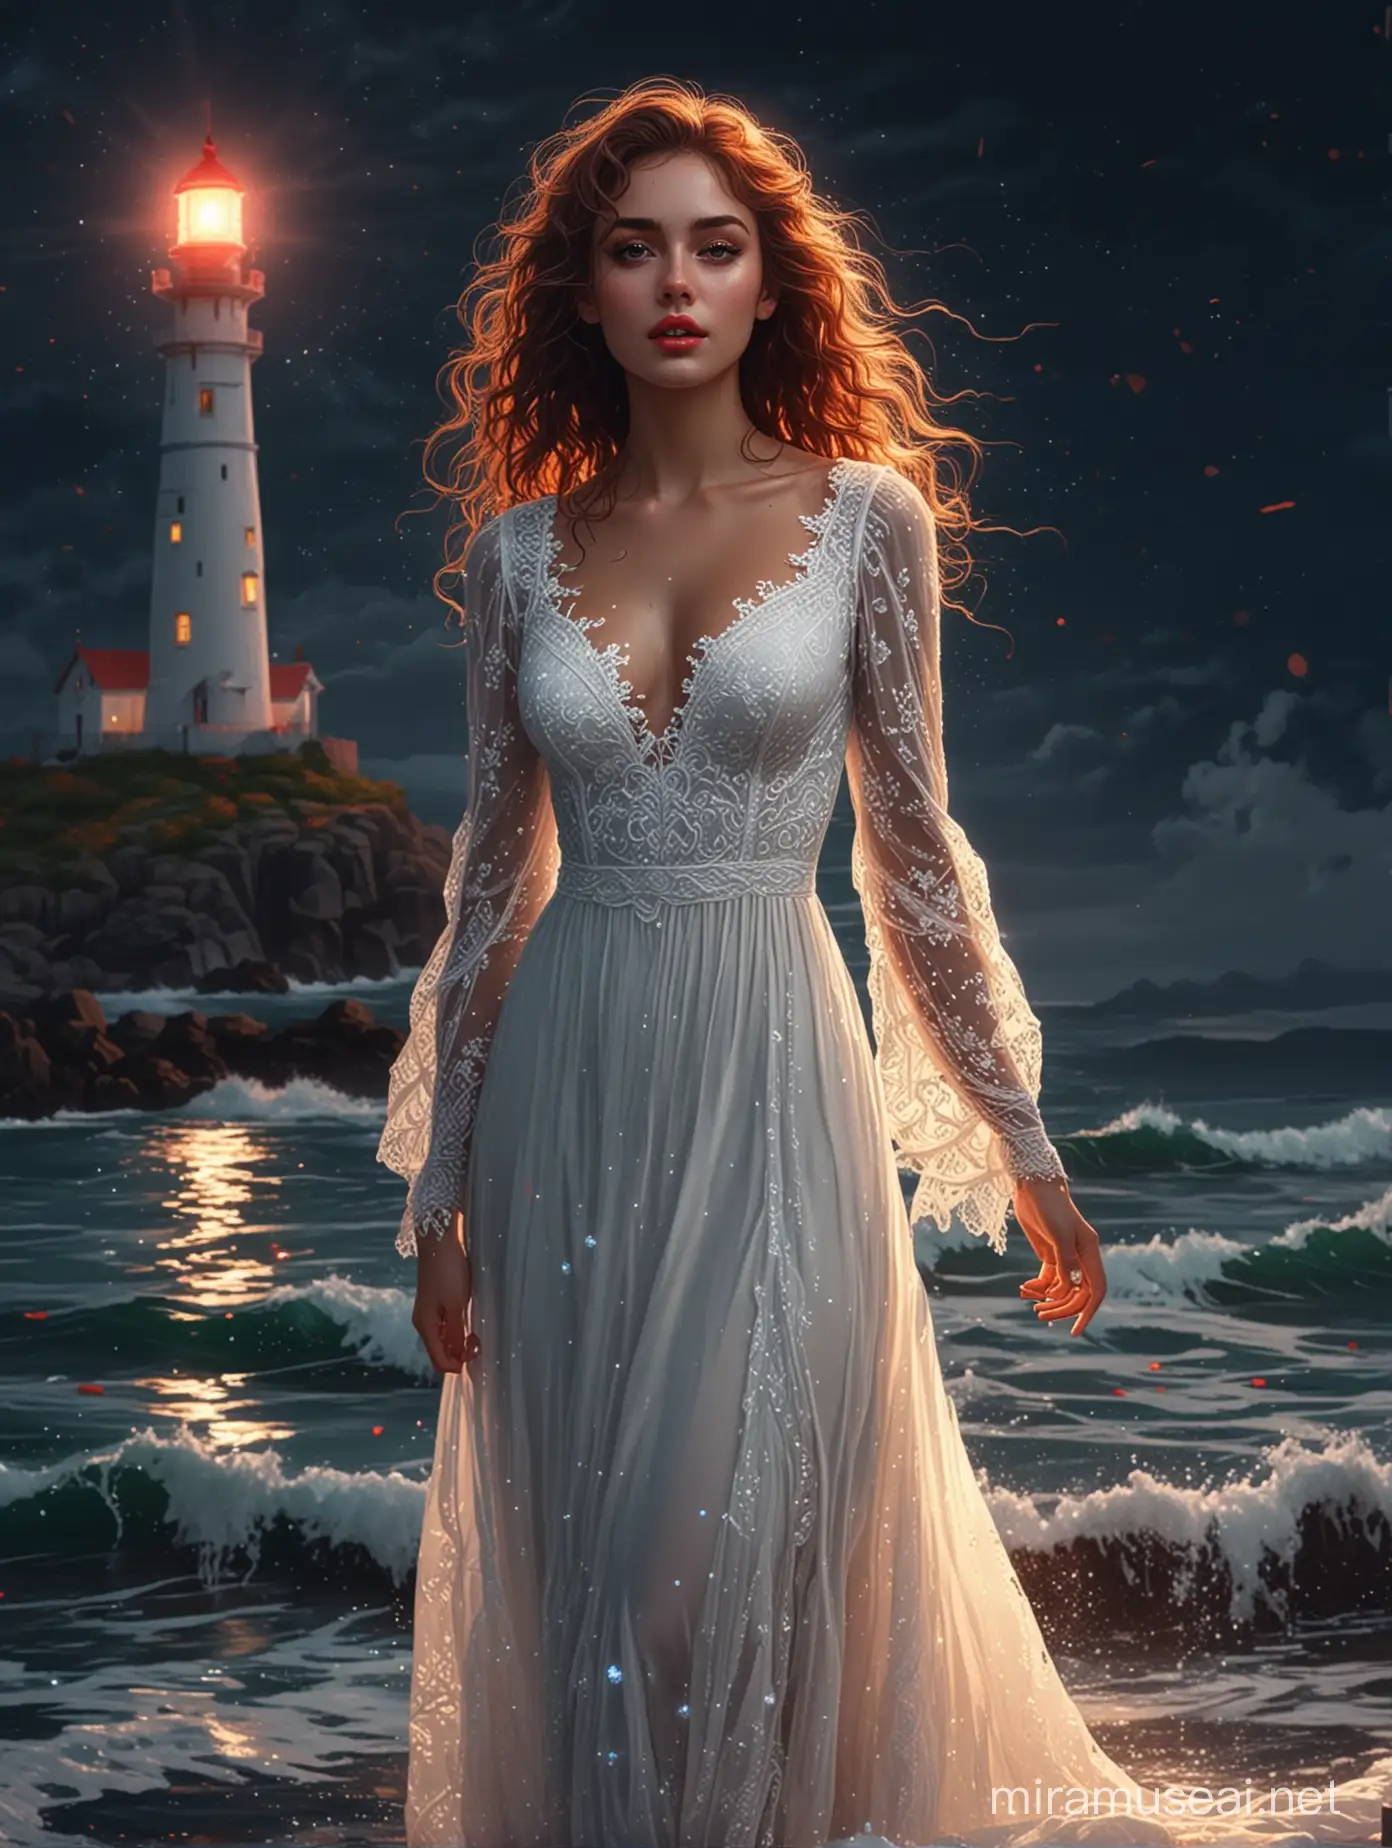 Pixel art,Aivision,a woman with very prety eyes, red full lips,, beautiful face,very curly browen hair in a long gown, in glitter white long Lace with sleeves ( neon color) standing into the water, she slowly fades away into windy dust, you see a lighthouse in the background, the water is very sparkly, neon colors, lighting, dark night